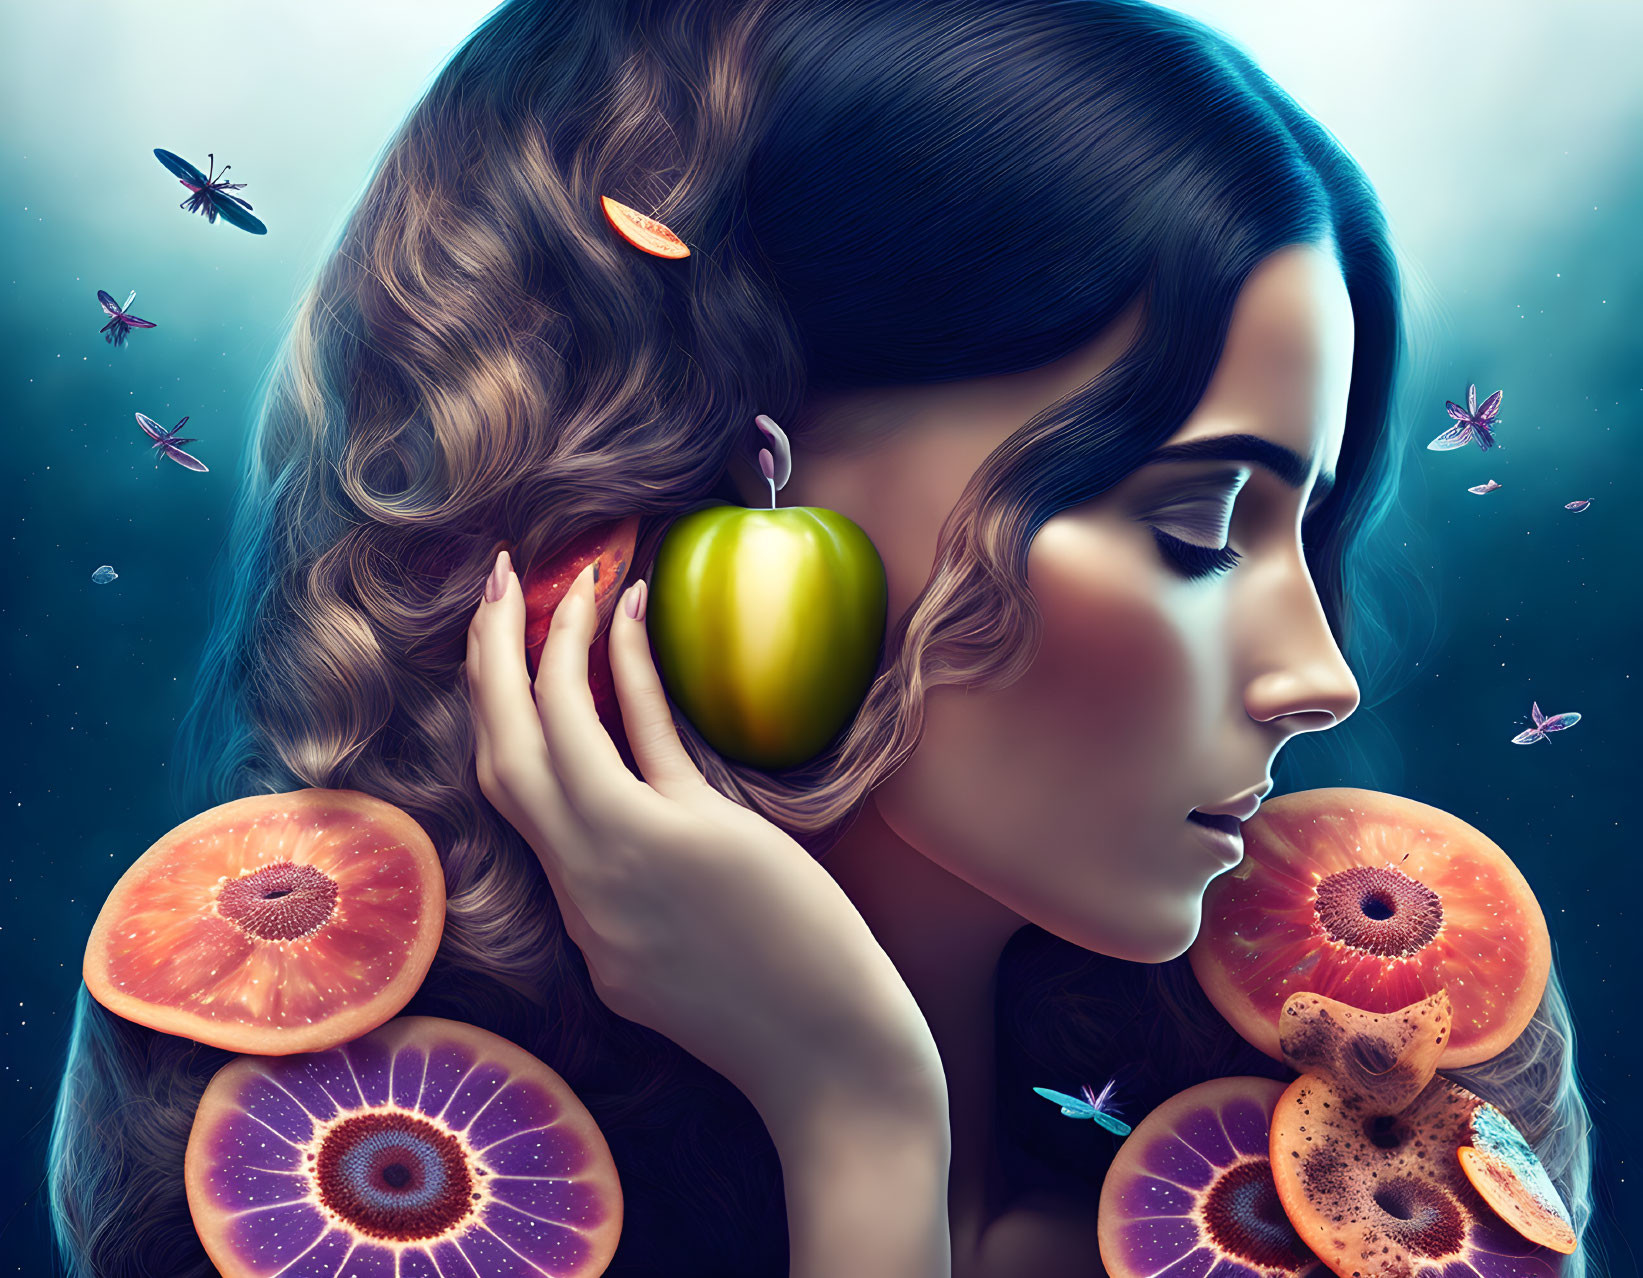 Surreal portrait of woman with vibrant fruit and insects on cosmic blue backdrop